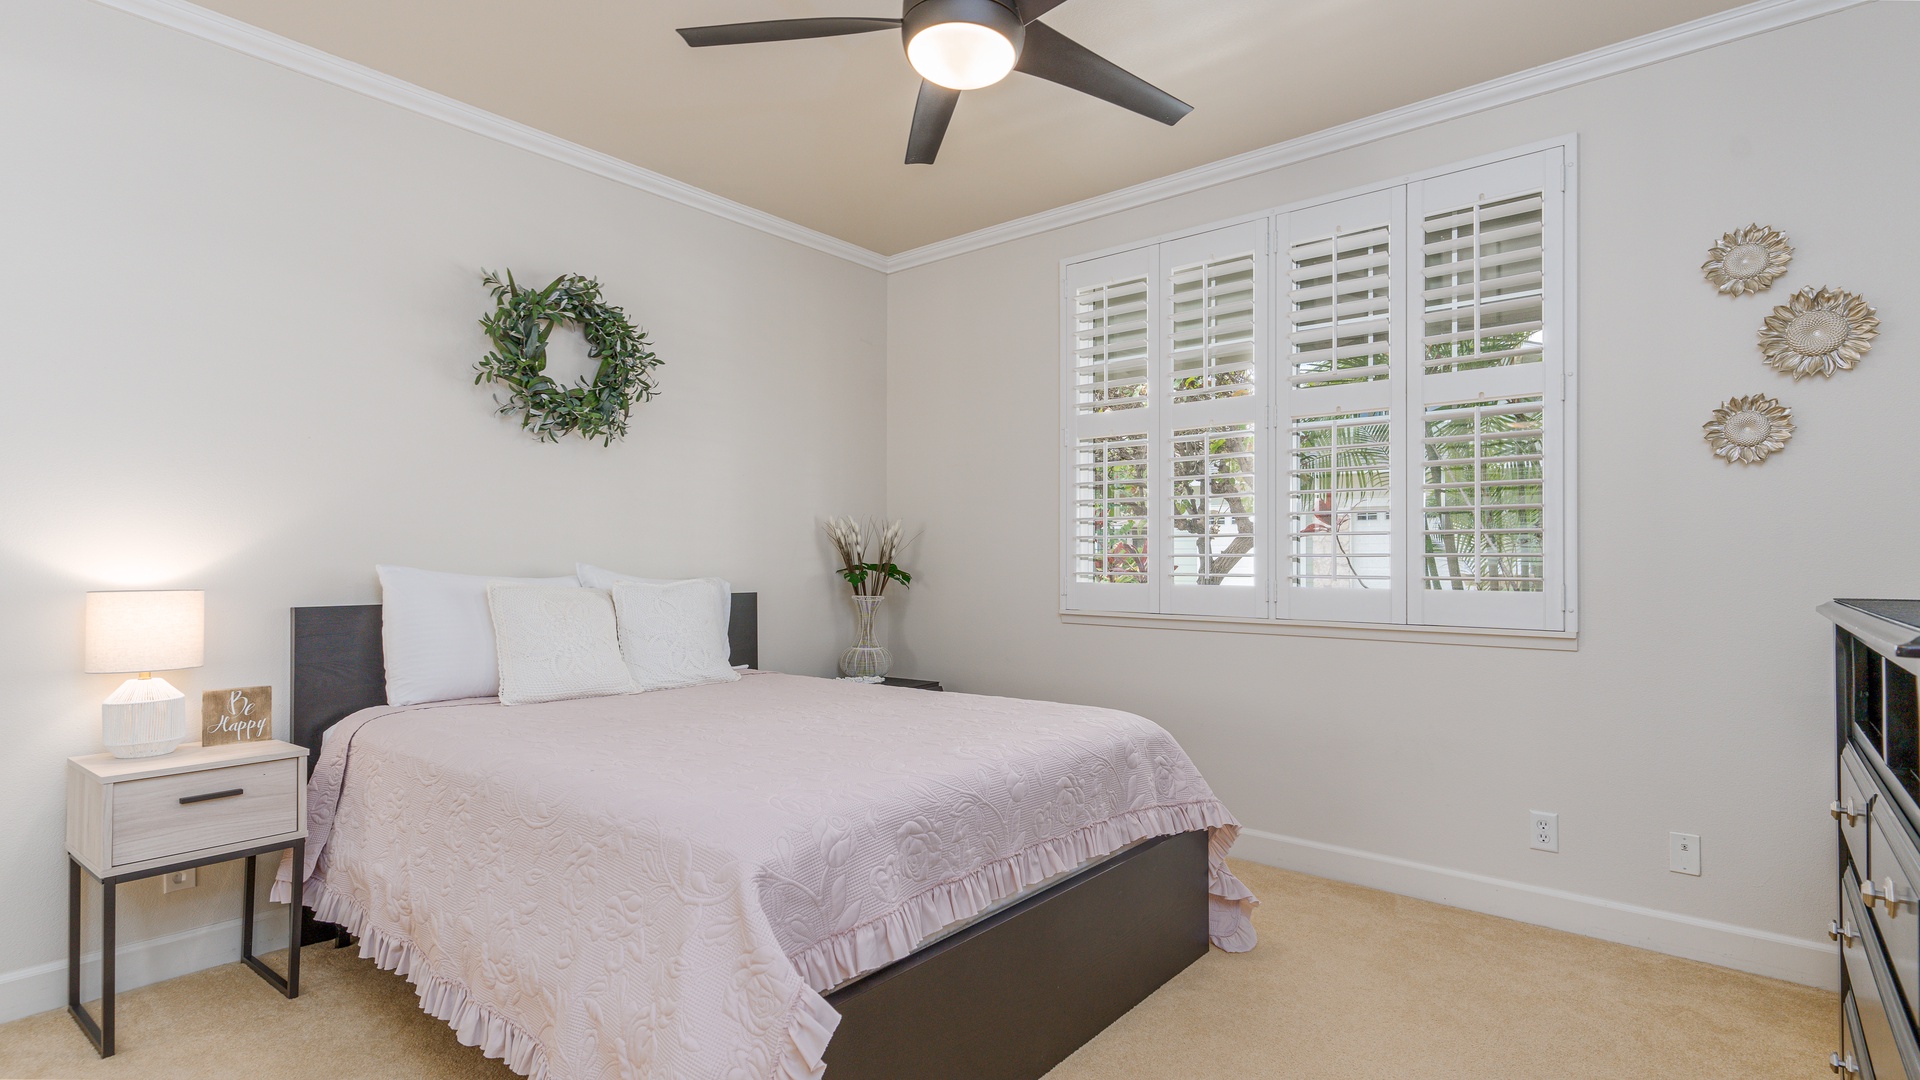 Kapolei Vacation Rentals, Ko Olina Kai 1027A - The second guest bedroom featuring views and a ceiling fan.